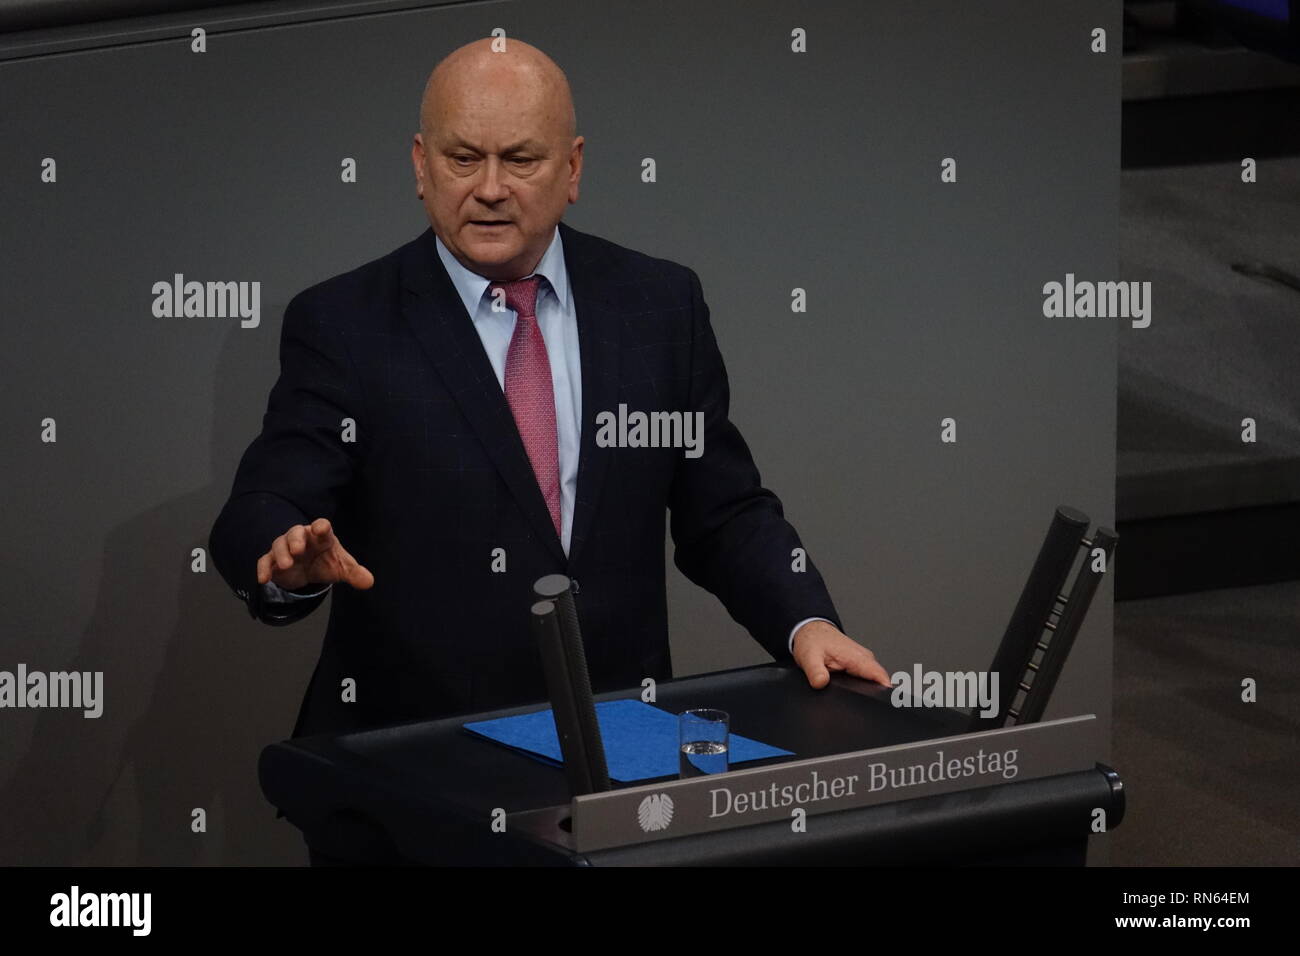 Berlin, Germany. 14th Feb, 2019. Manfred Grund (CDU) speaks during a security policy debate in the Bundestag. Credit: Sven Braun/dpa/Alamy Live News Stock Photo